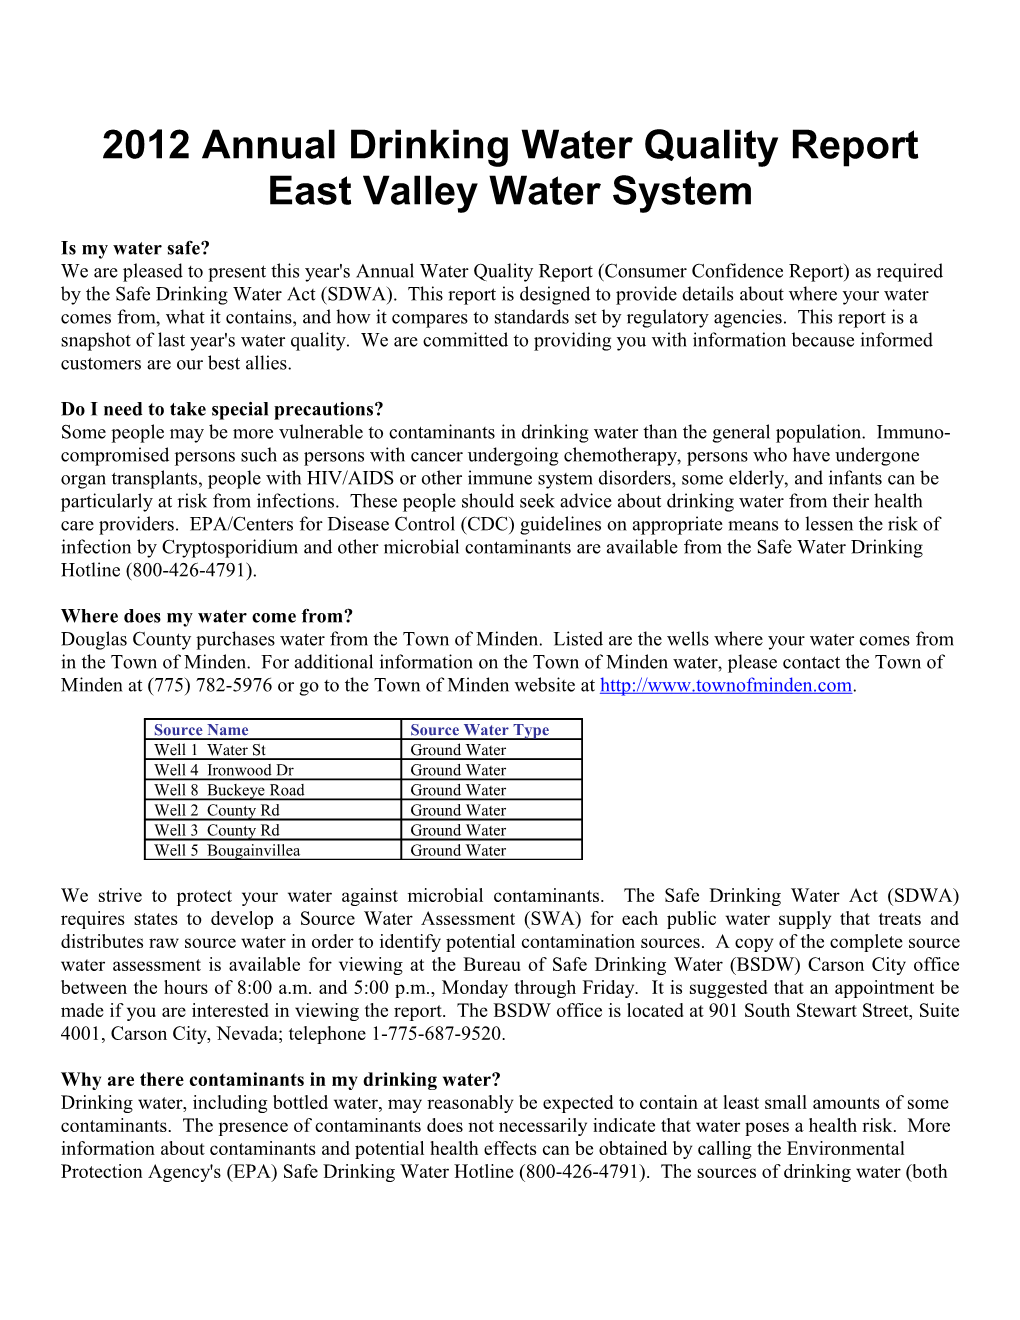 2010 Annual Drinking Water Quality Report East Valley Water System